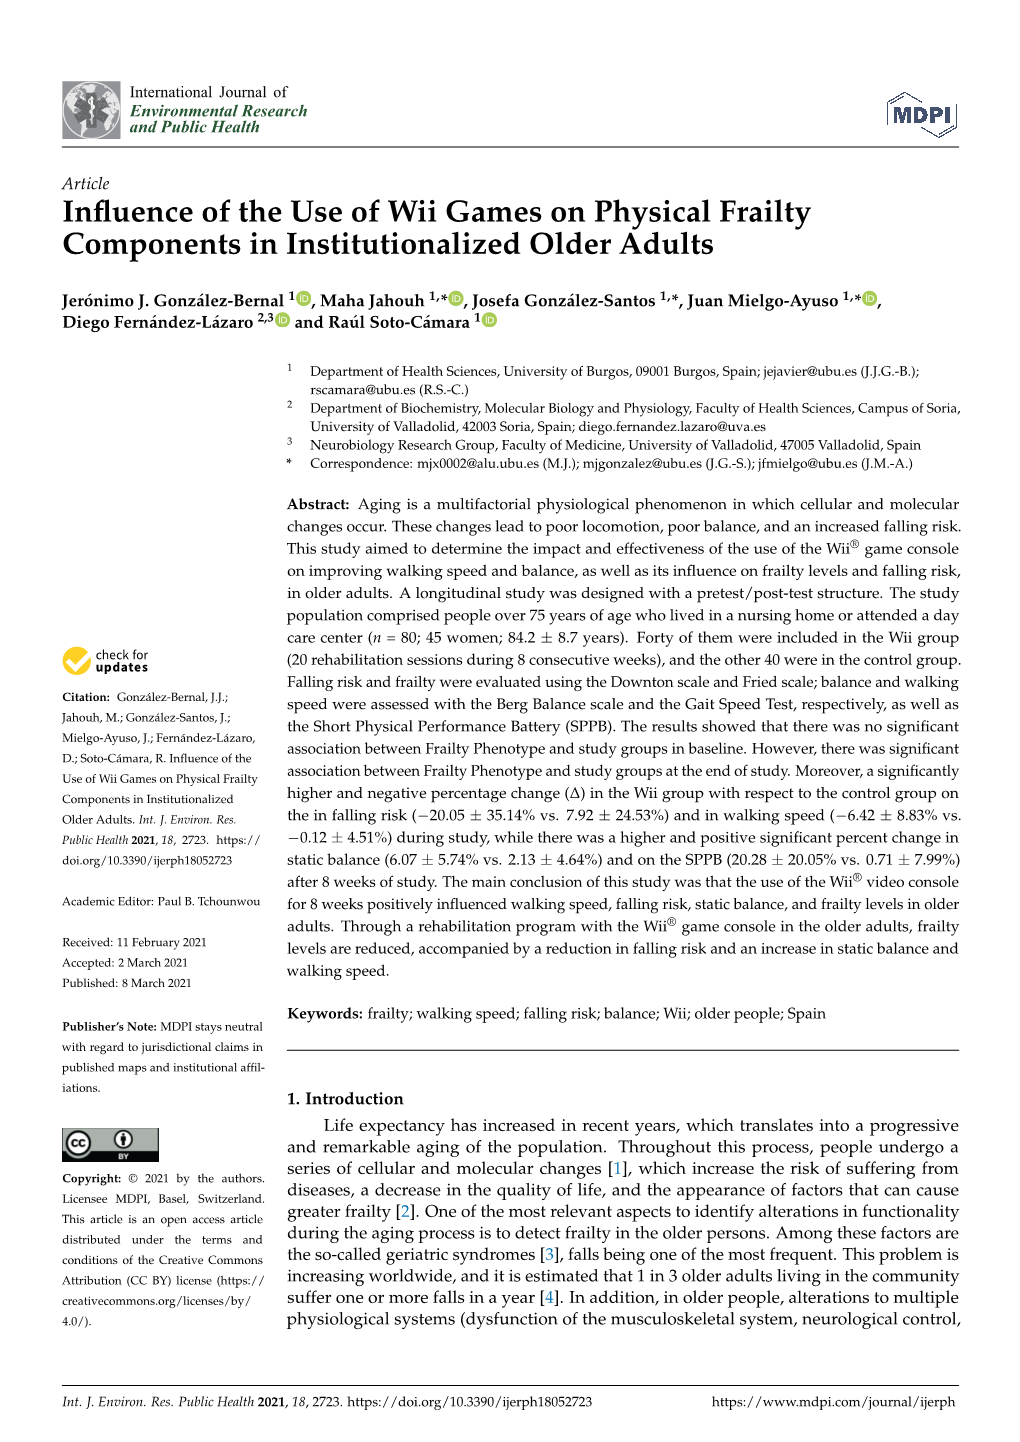 Influence of the Use of Wii Games on Physical Frailty Components